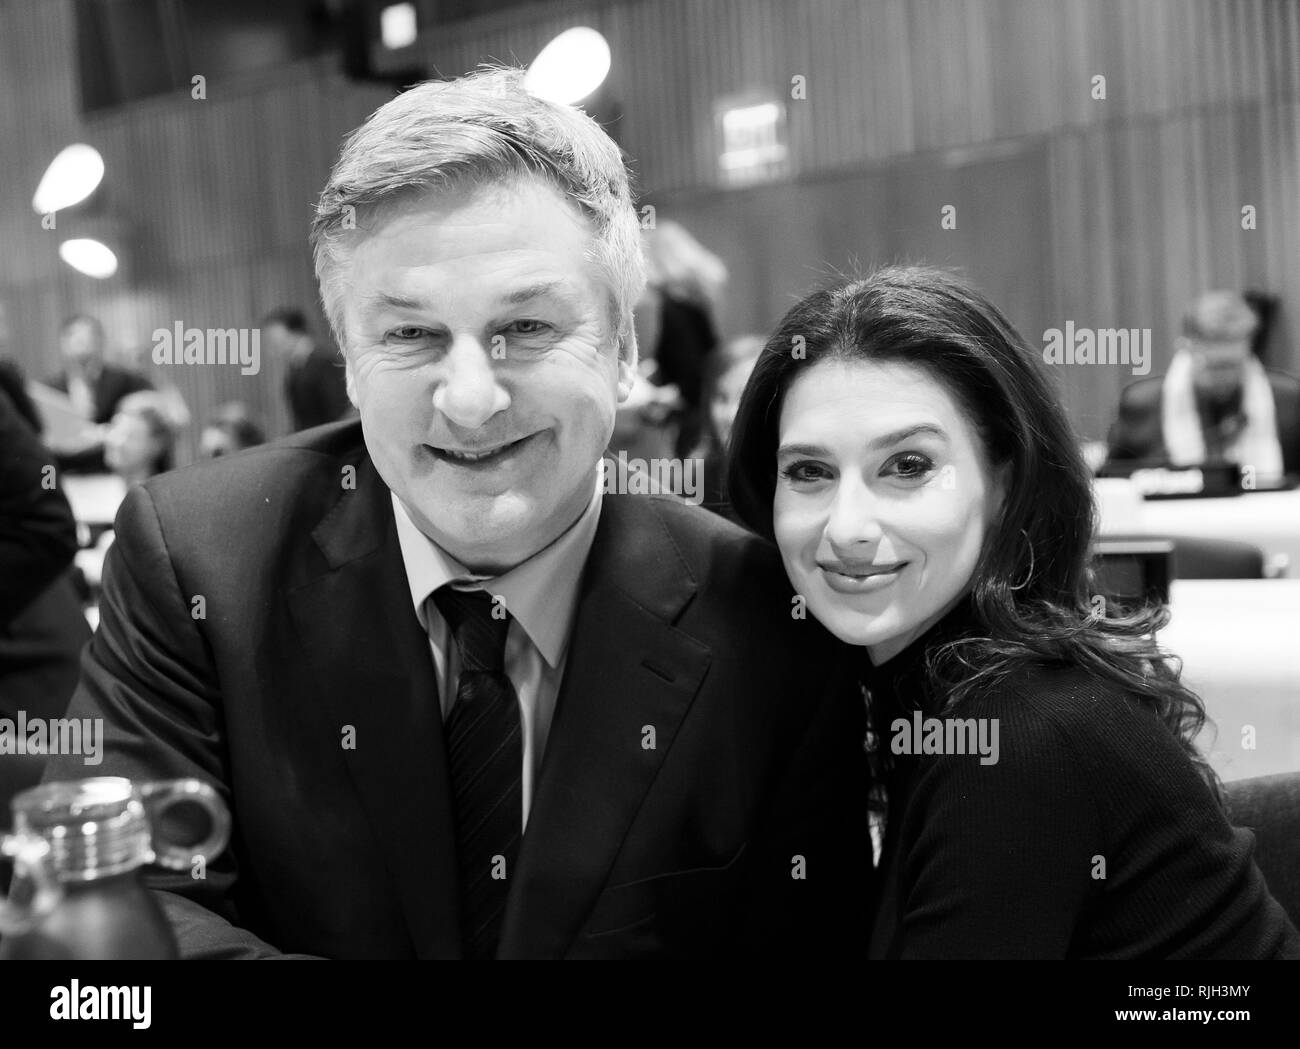 Hilaria baldwin and alec Black and White Stock Photos & Images - Alamy